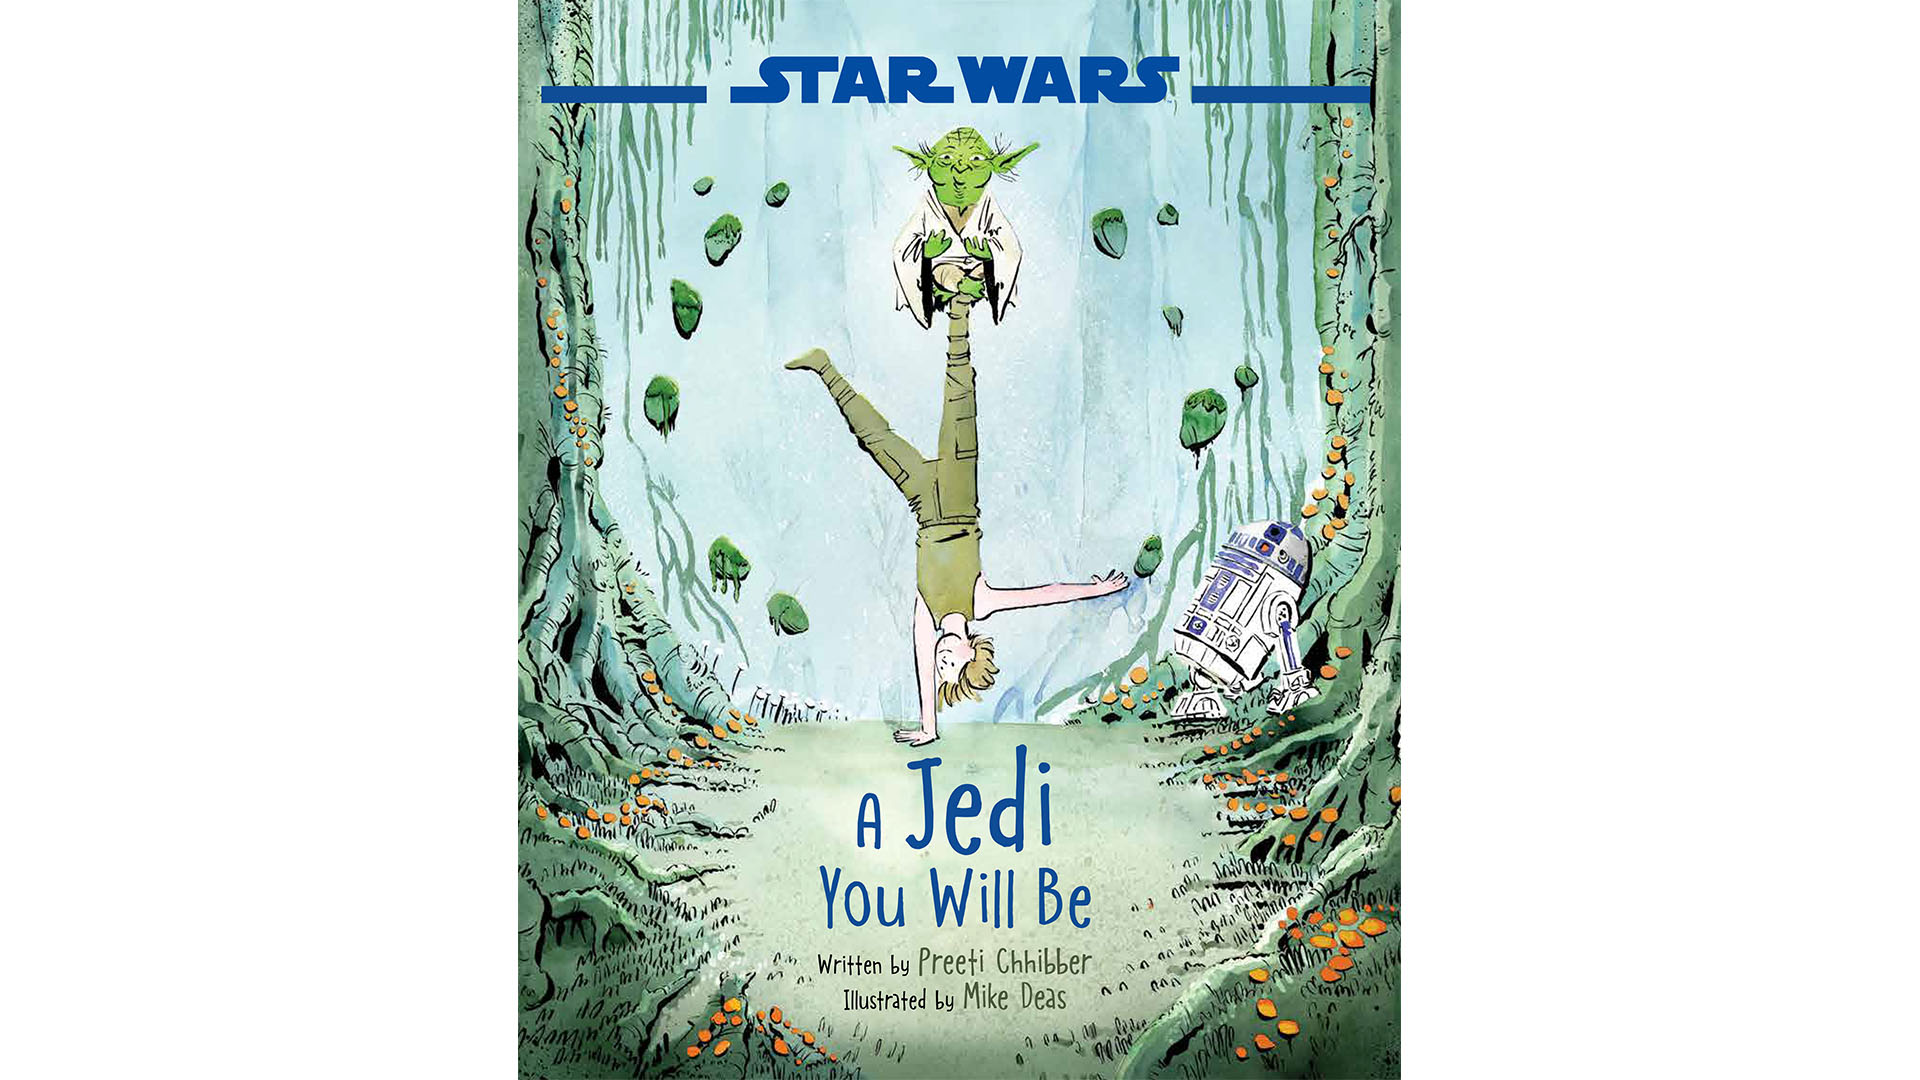 The cover of Star Wars: A Jedi You Will Be children's book written by Preeti Chhibber and illustrated by Mike Deas